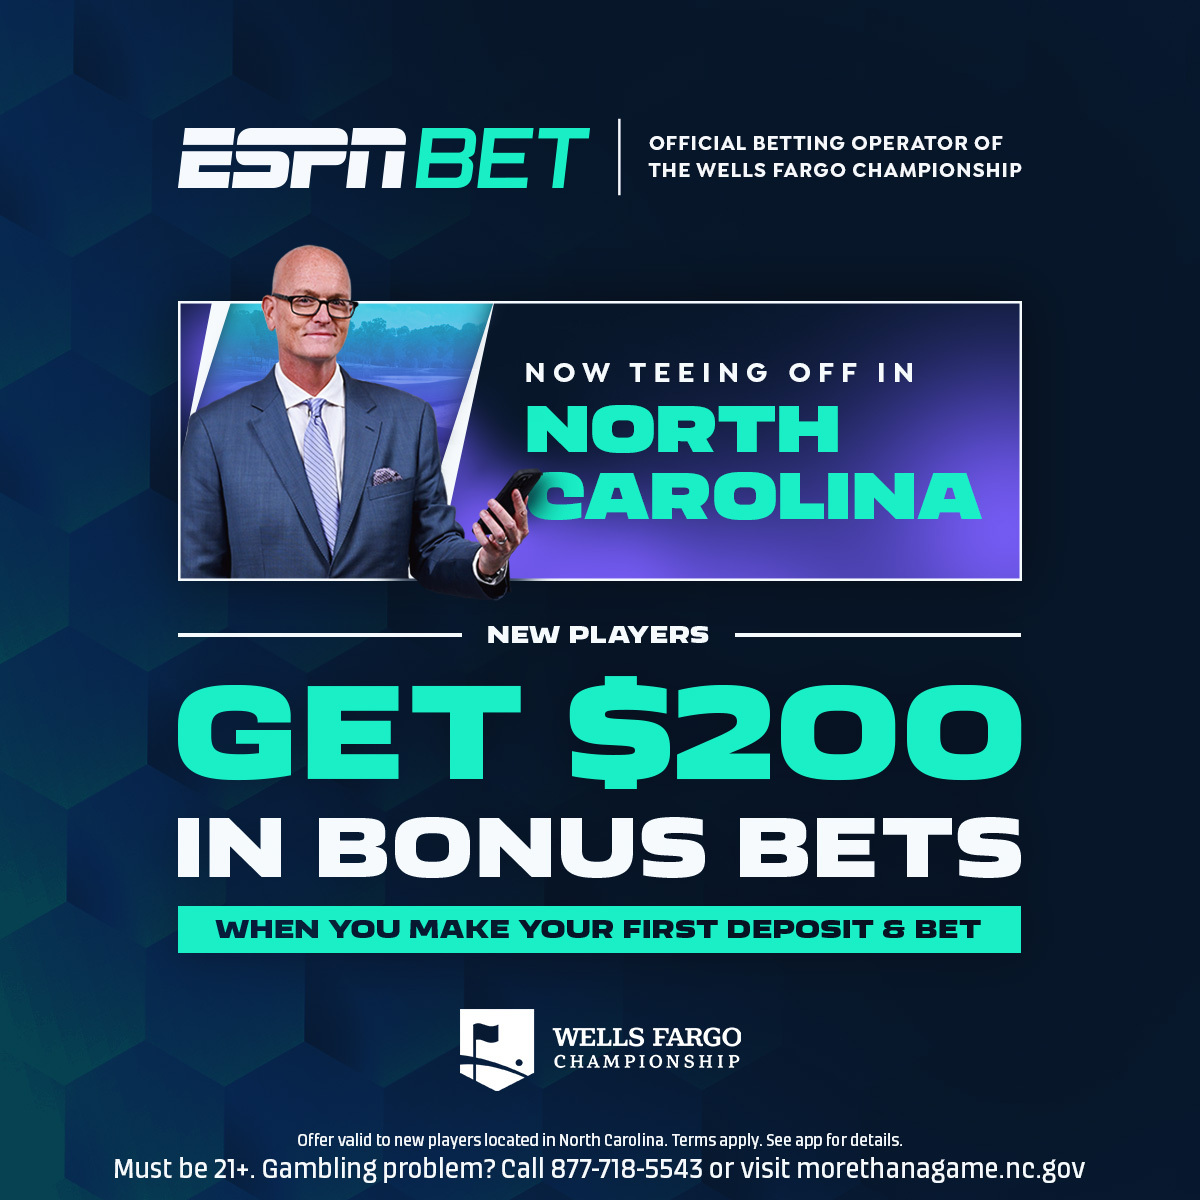 Big news! North Carolina just legalized sports betting today and we’re excited to share our new partnership with @ESPNBet as the Official Betting Operator of the #WellsFargoChampionship. ⛳ Take advantage of this offer and make sure to stop by their Member's Lounge on the…